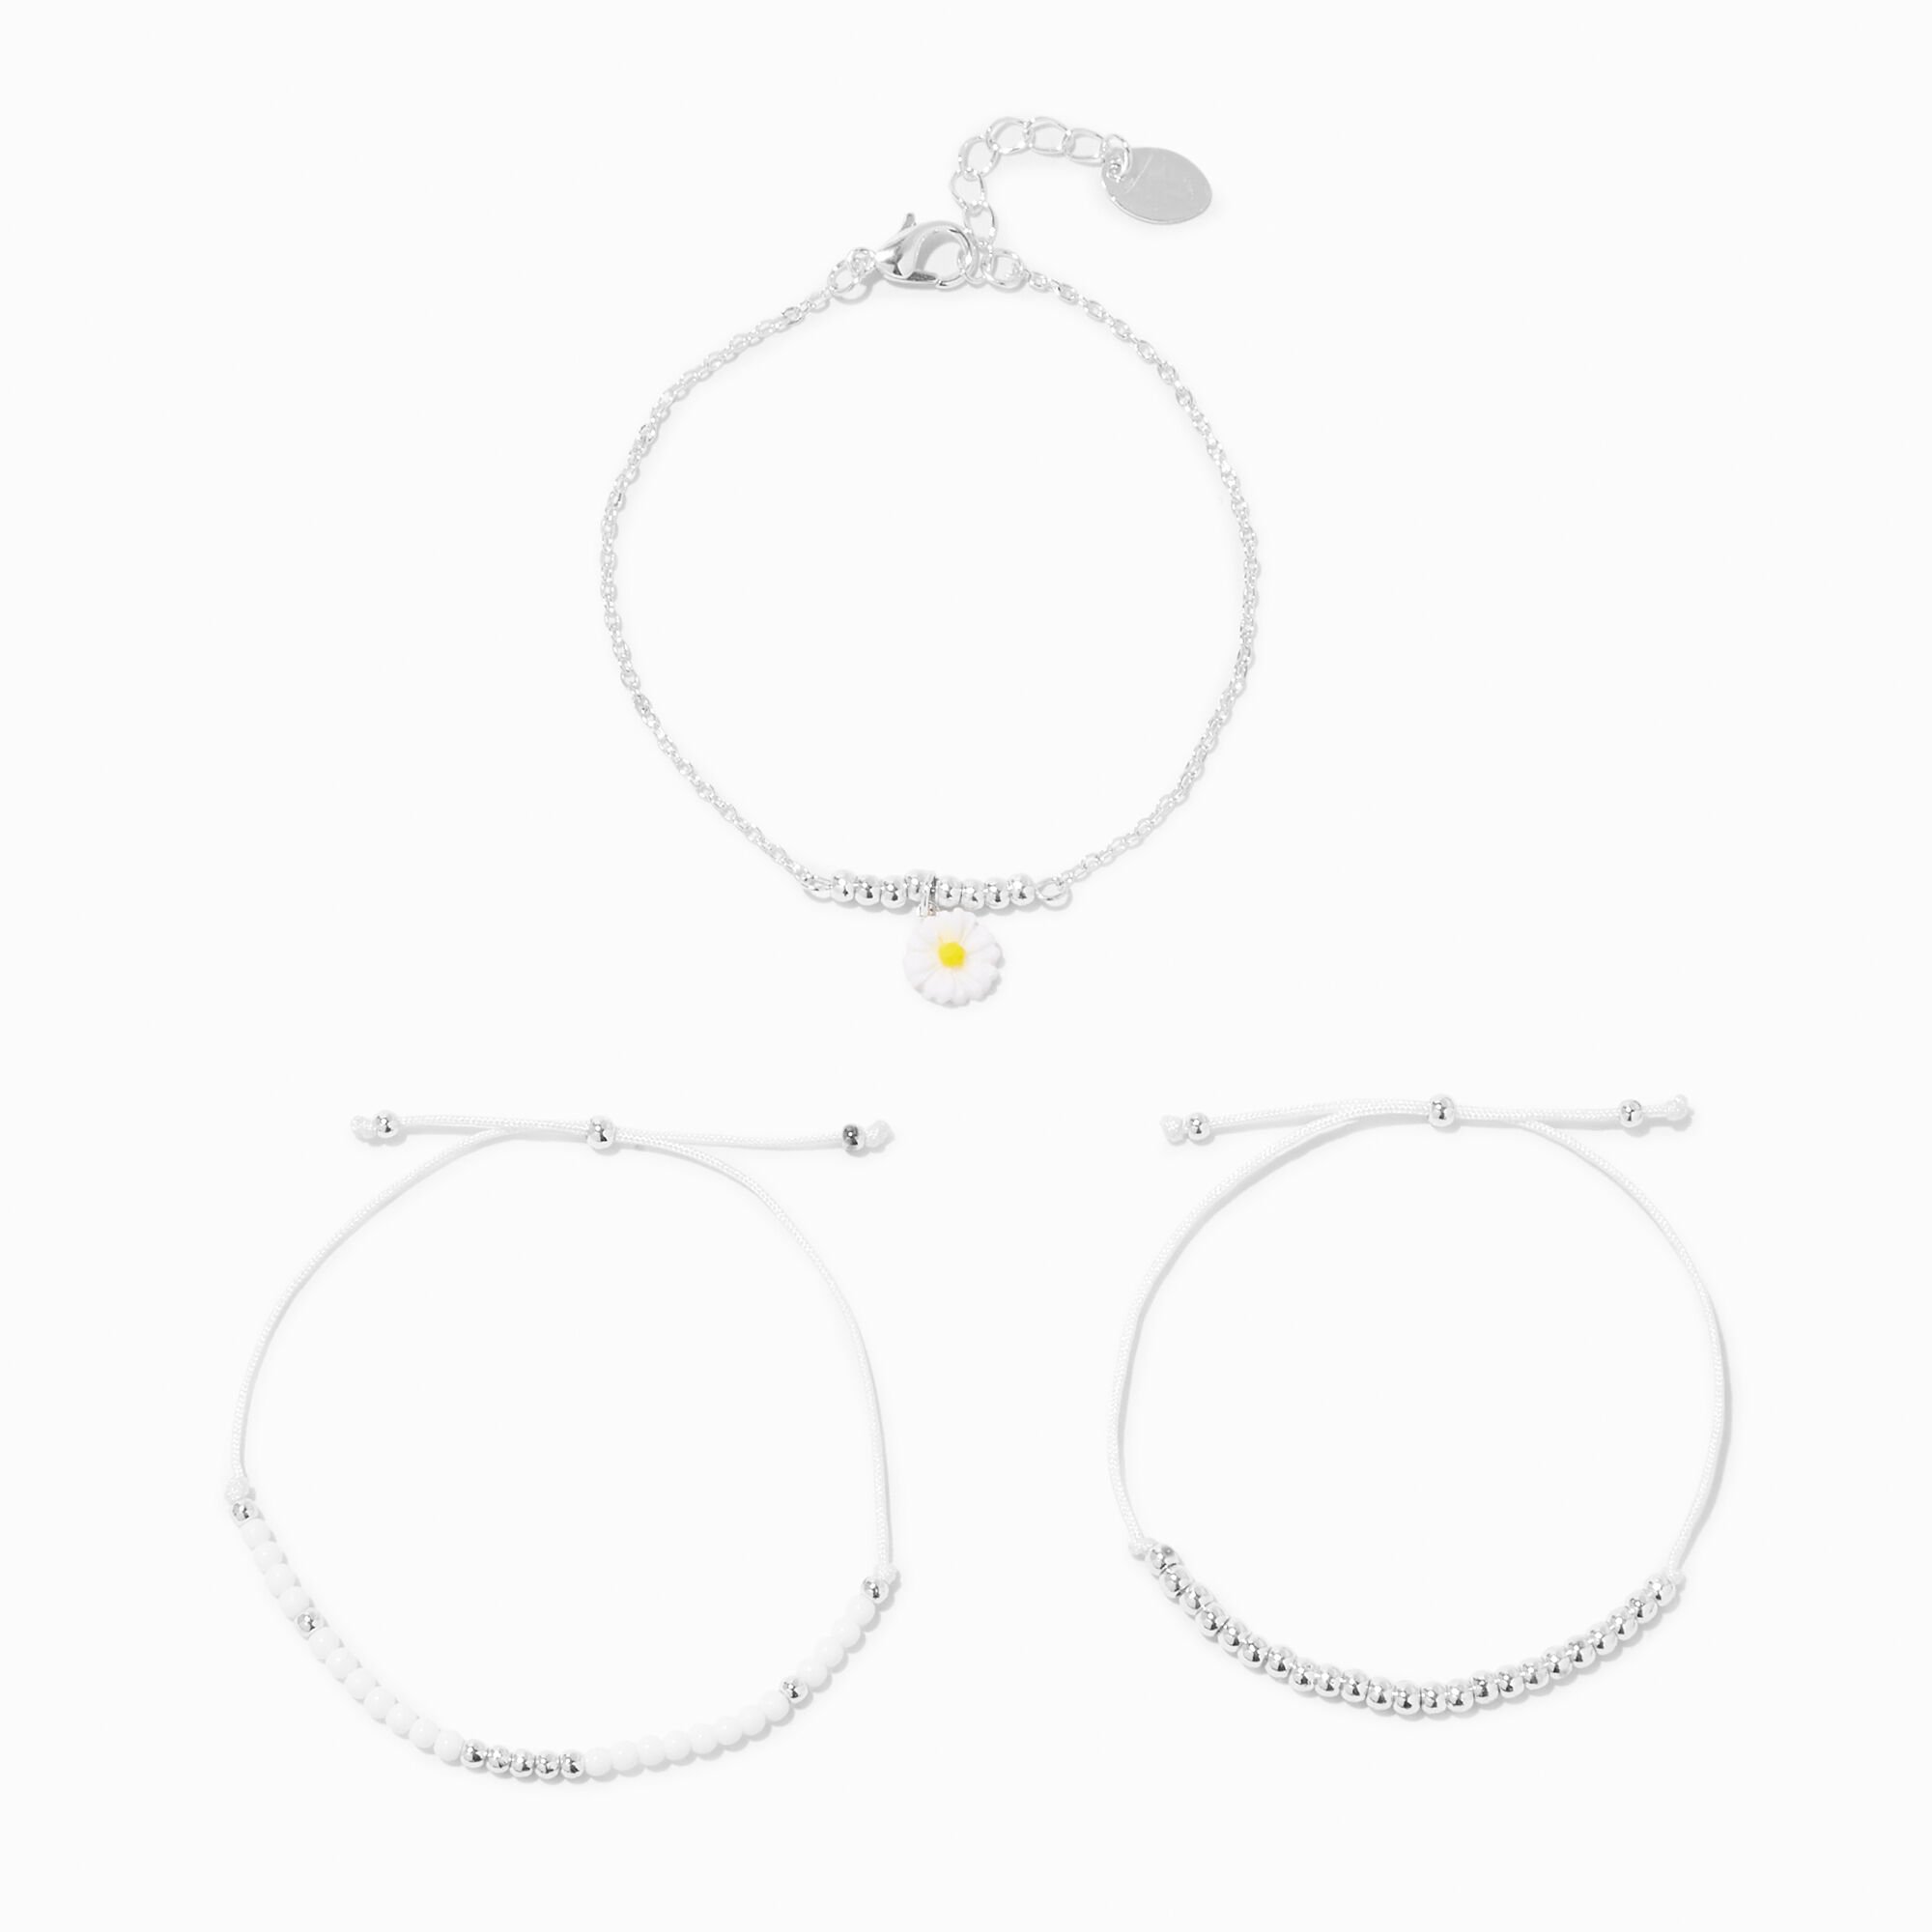 View Claires Tone Daisy Chainlink Beaded Bracelets 3 Pack Silver information